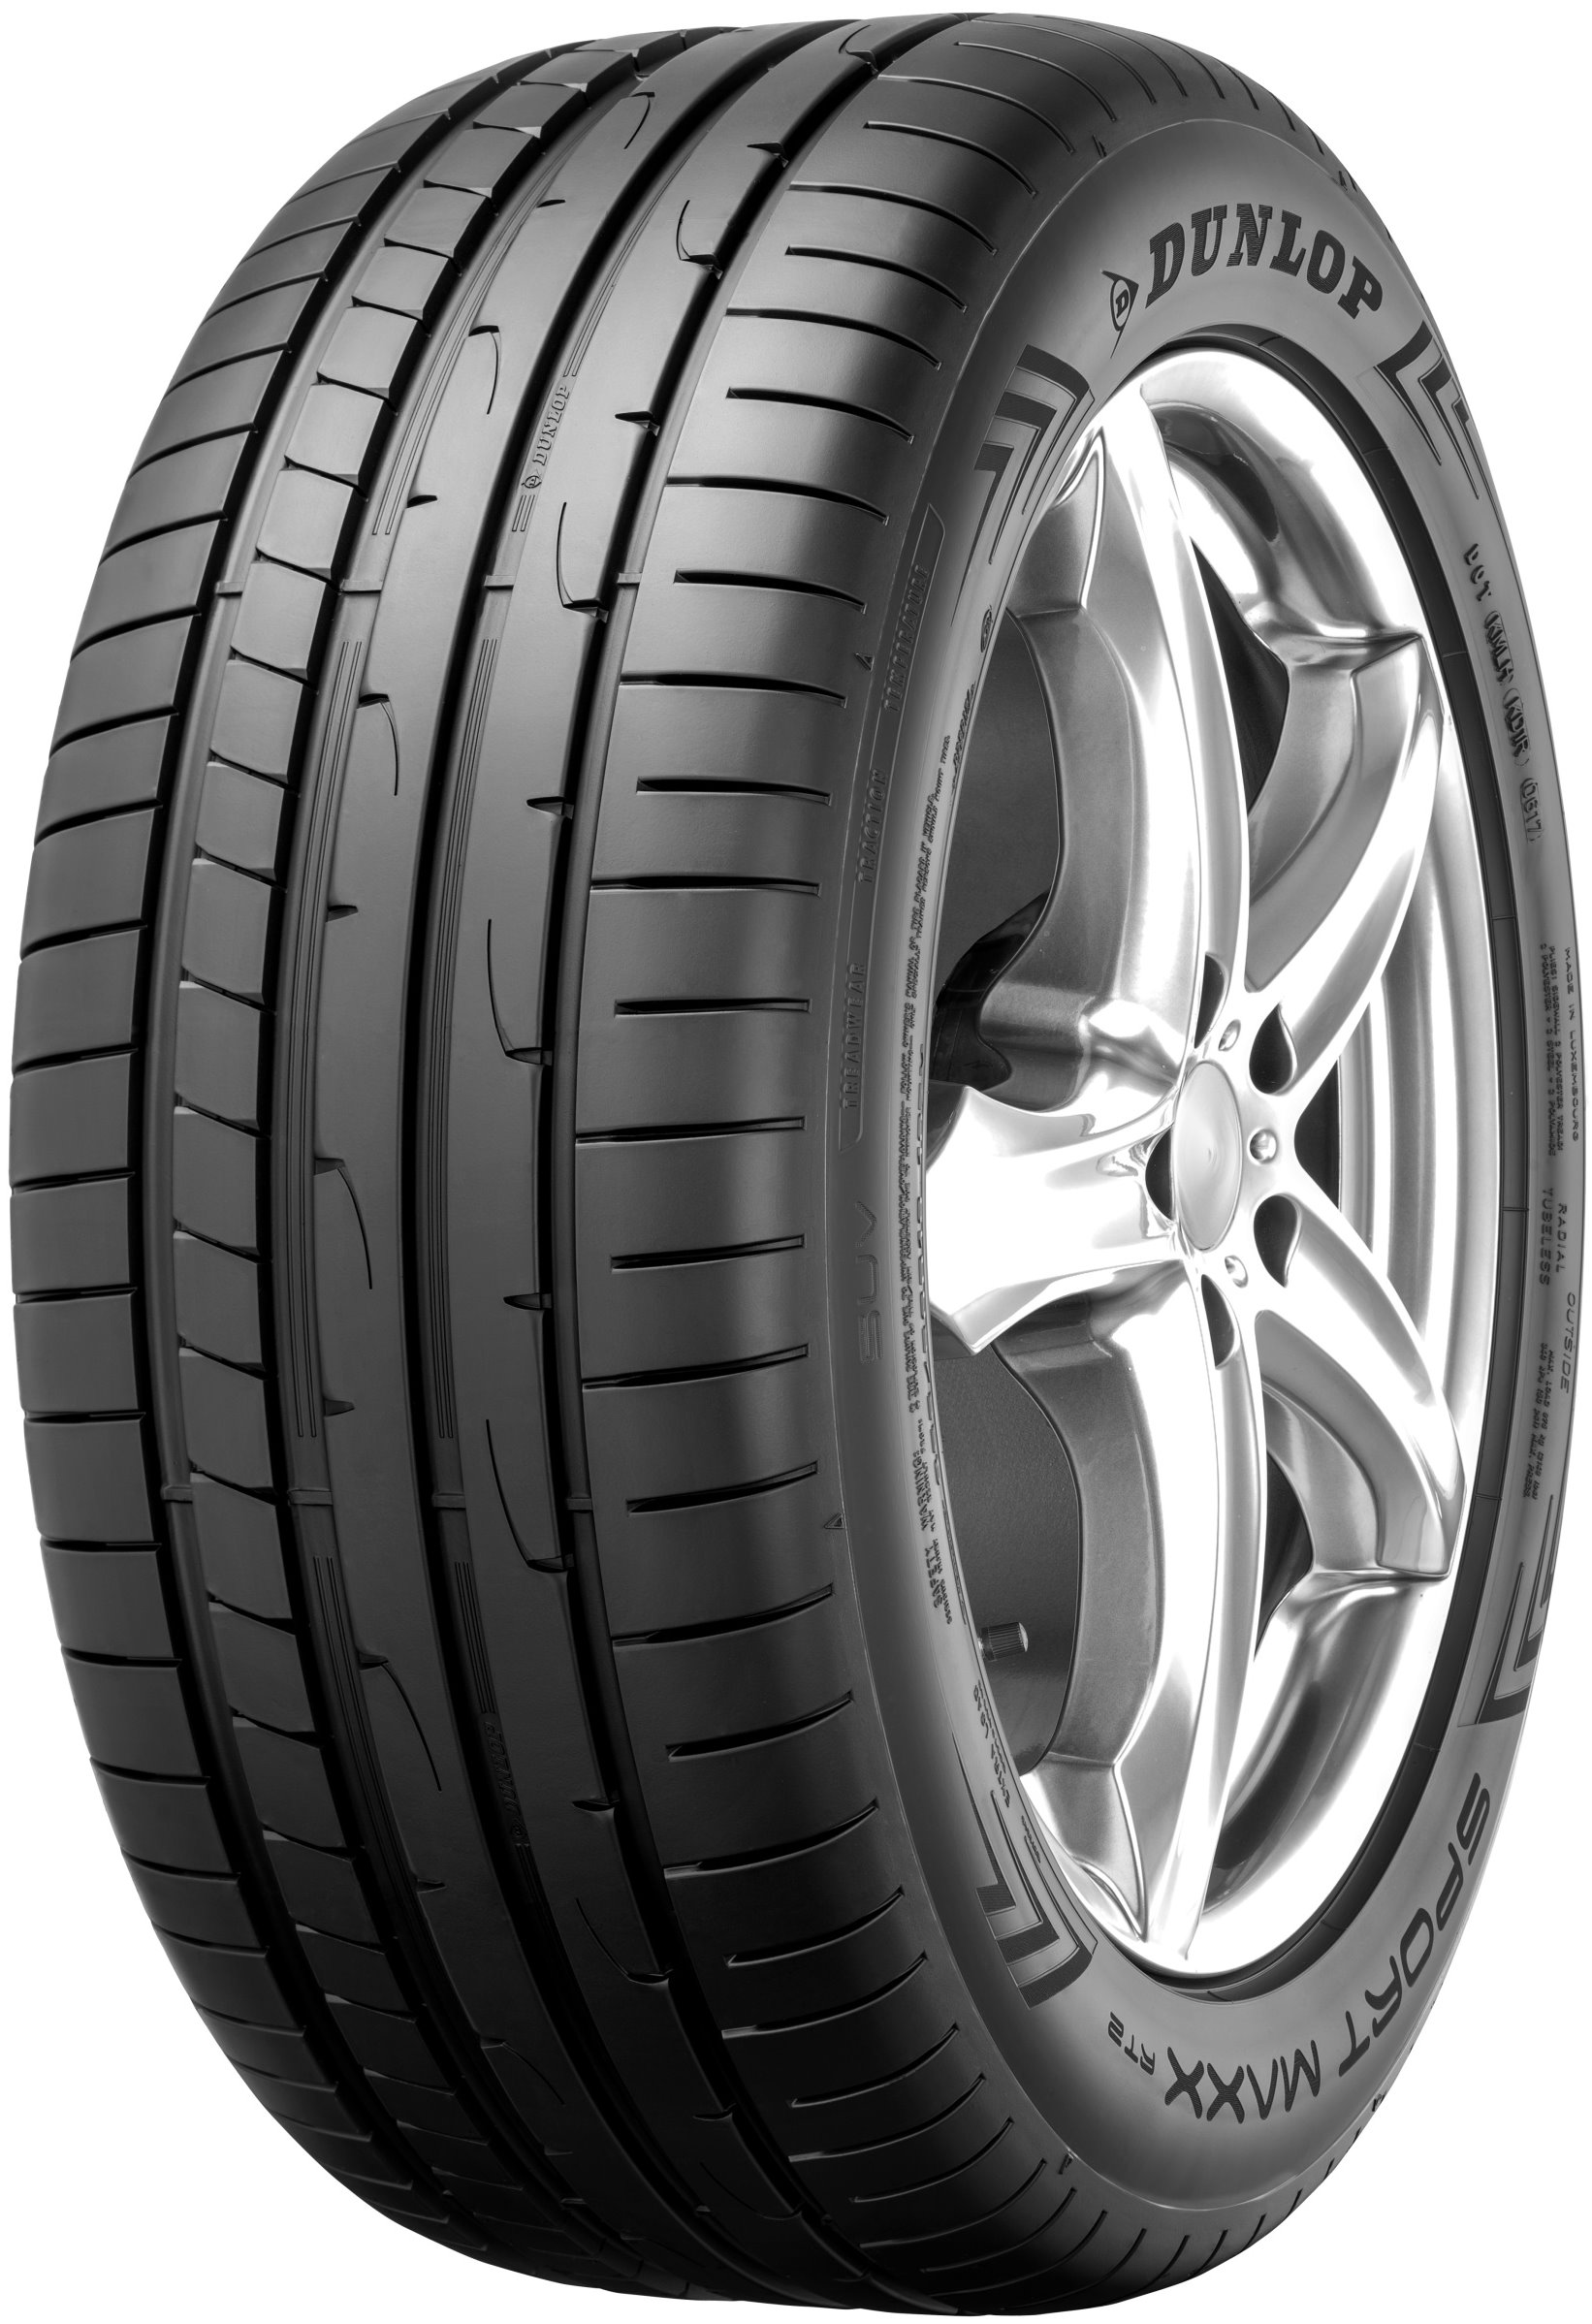 Dunlop 2 - Tire Reviews and